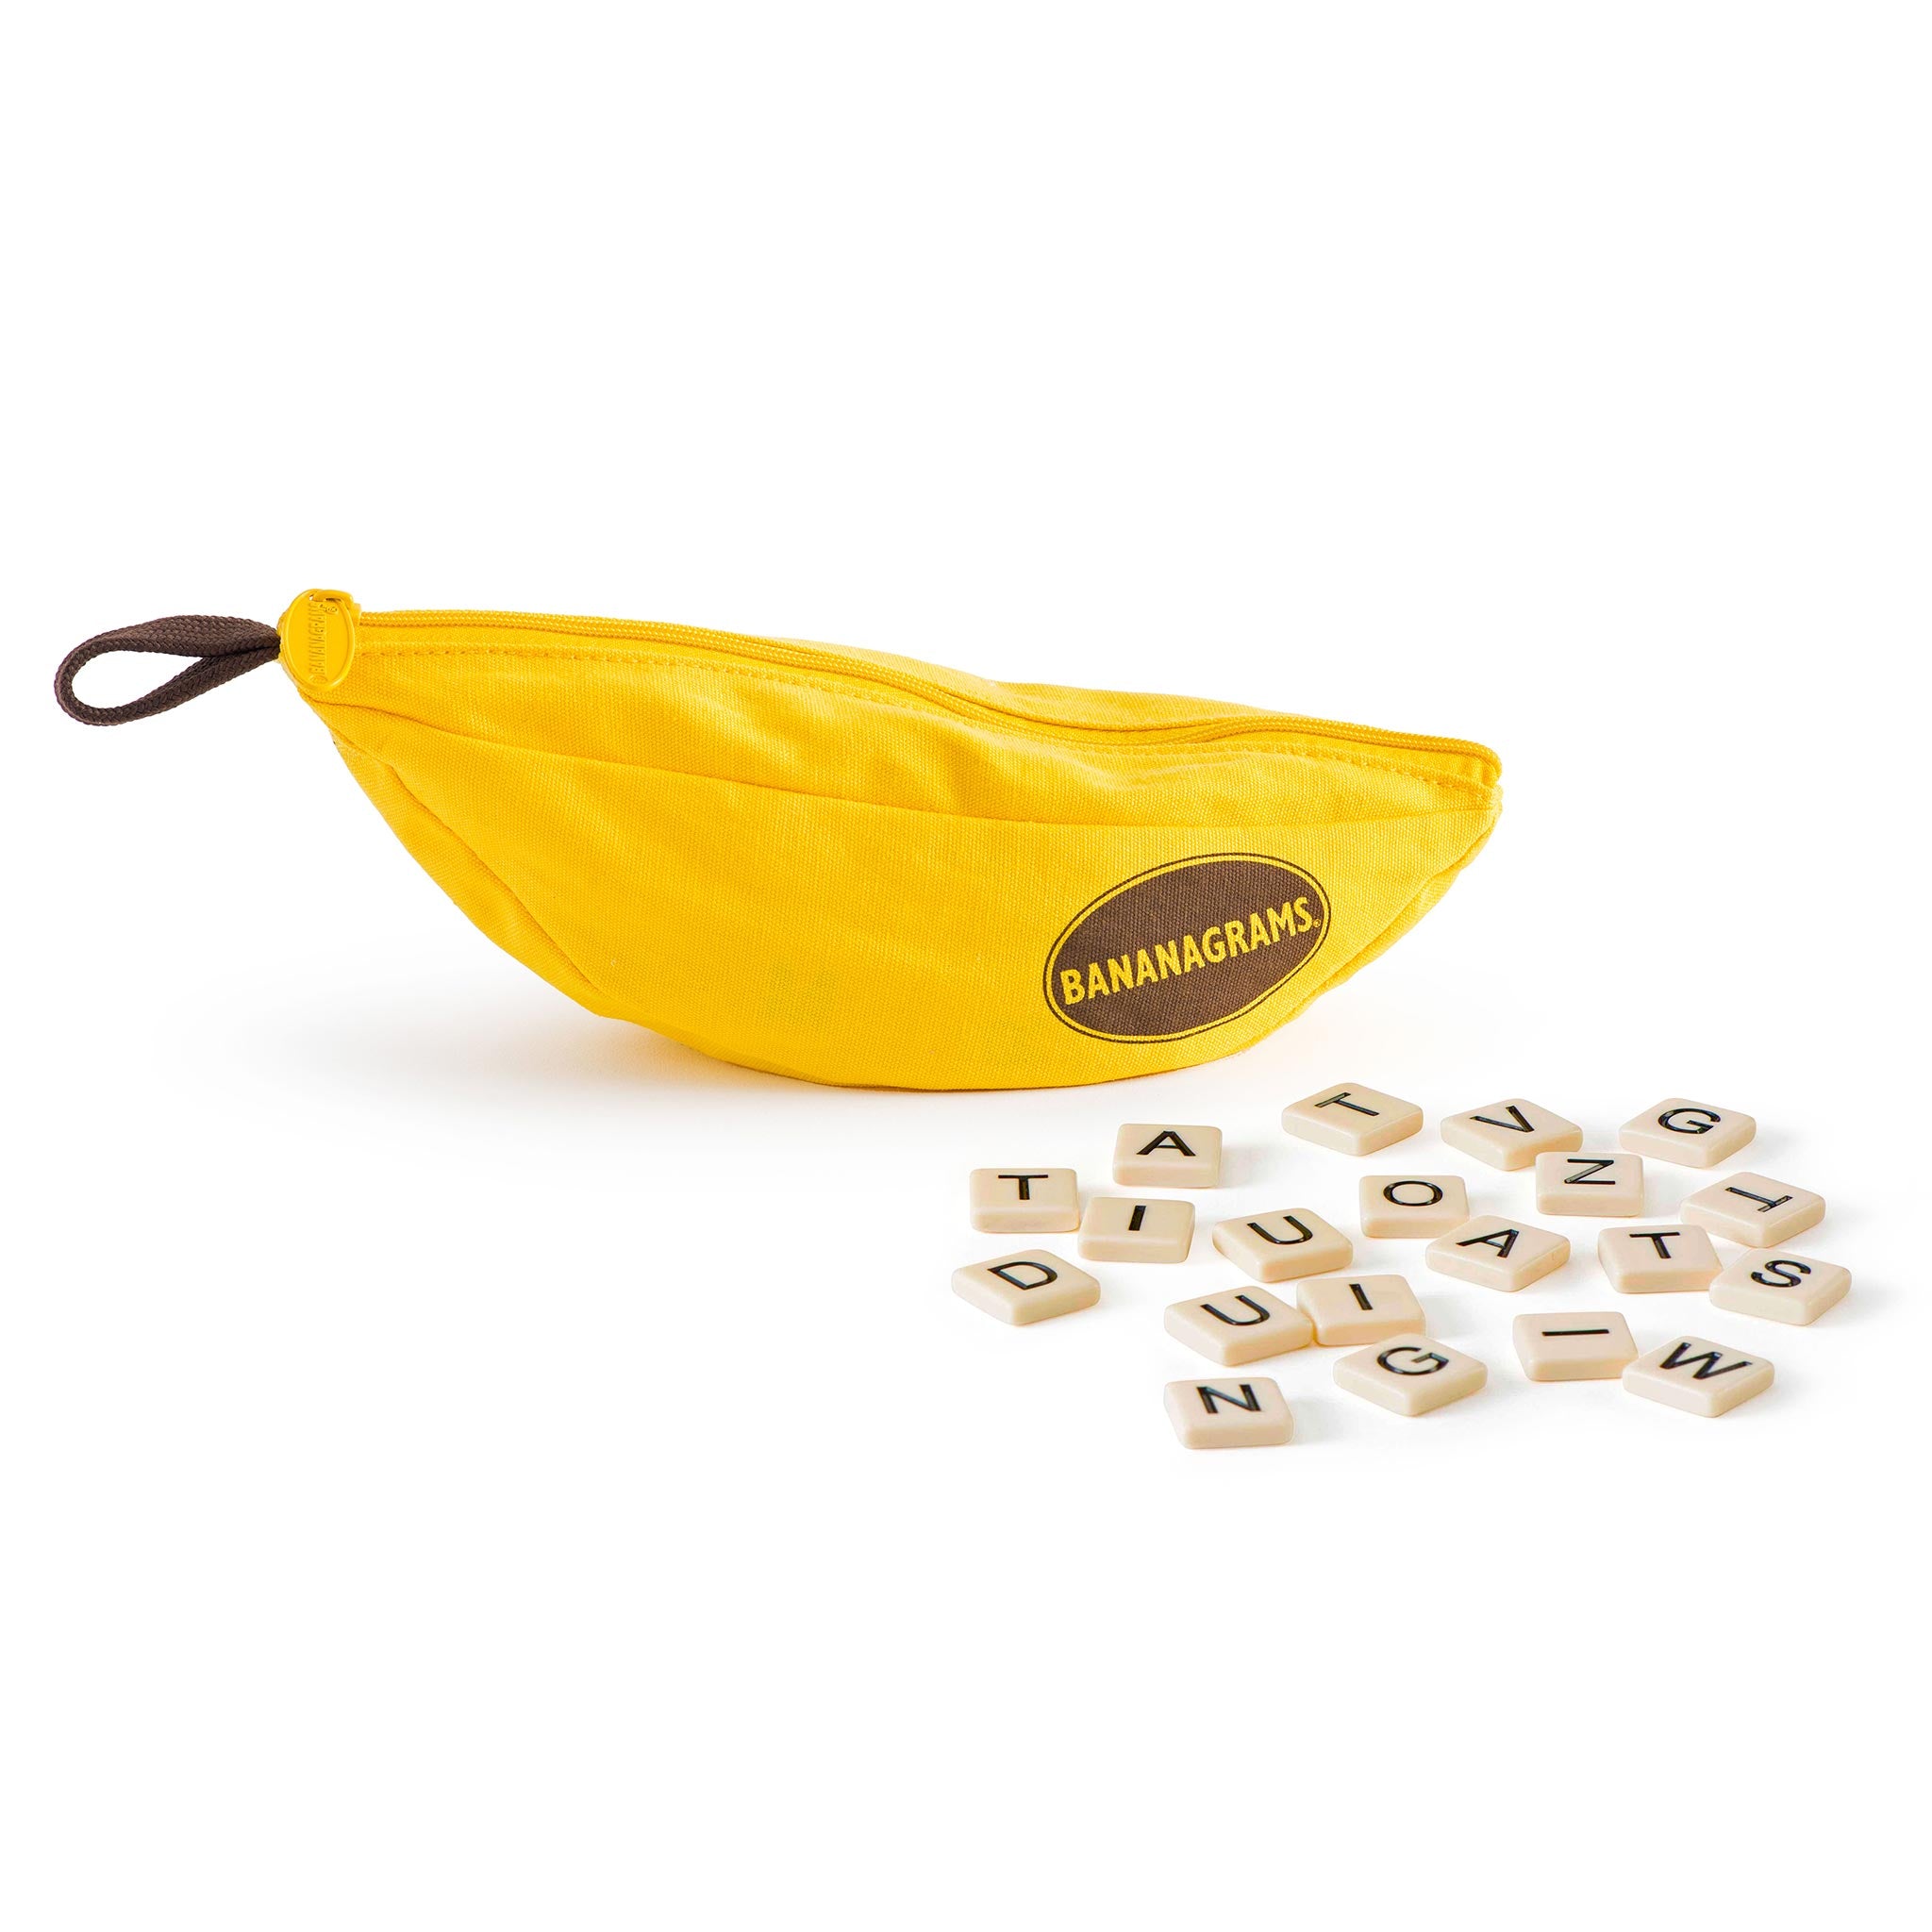 Classic BANANAGRAMS pouch and tiles